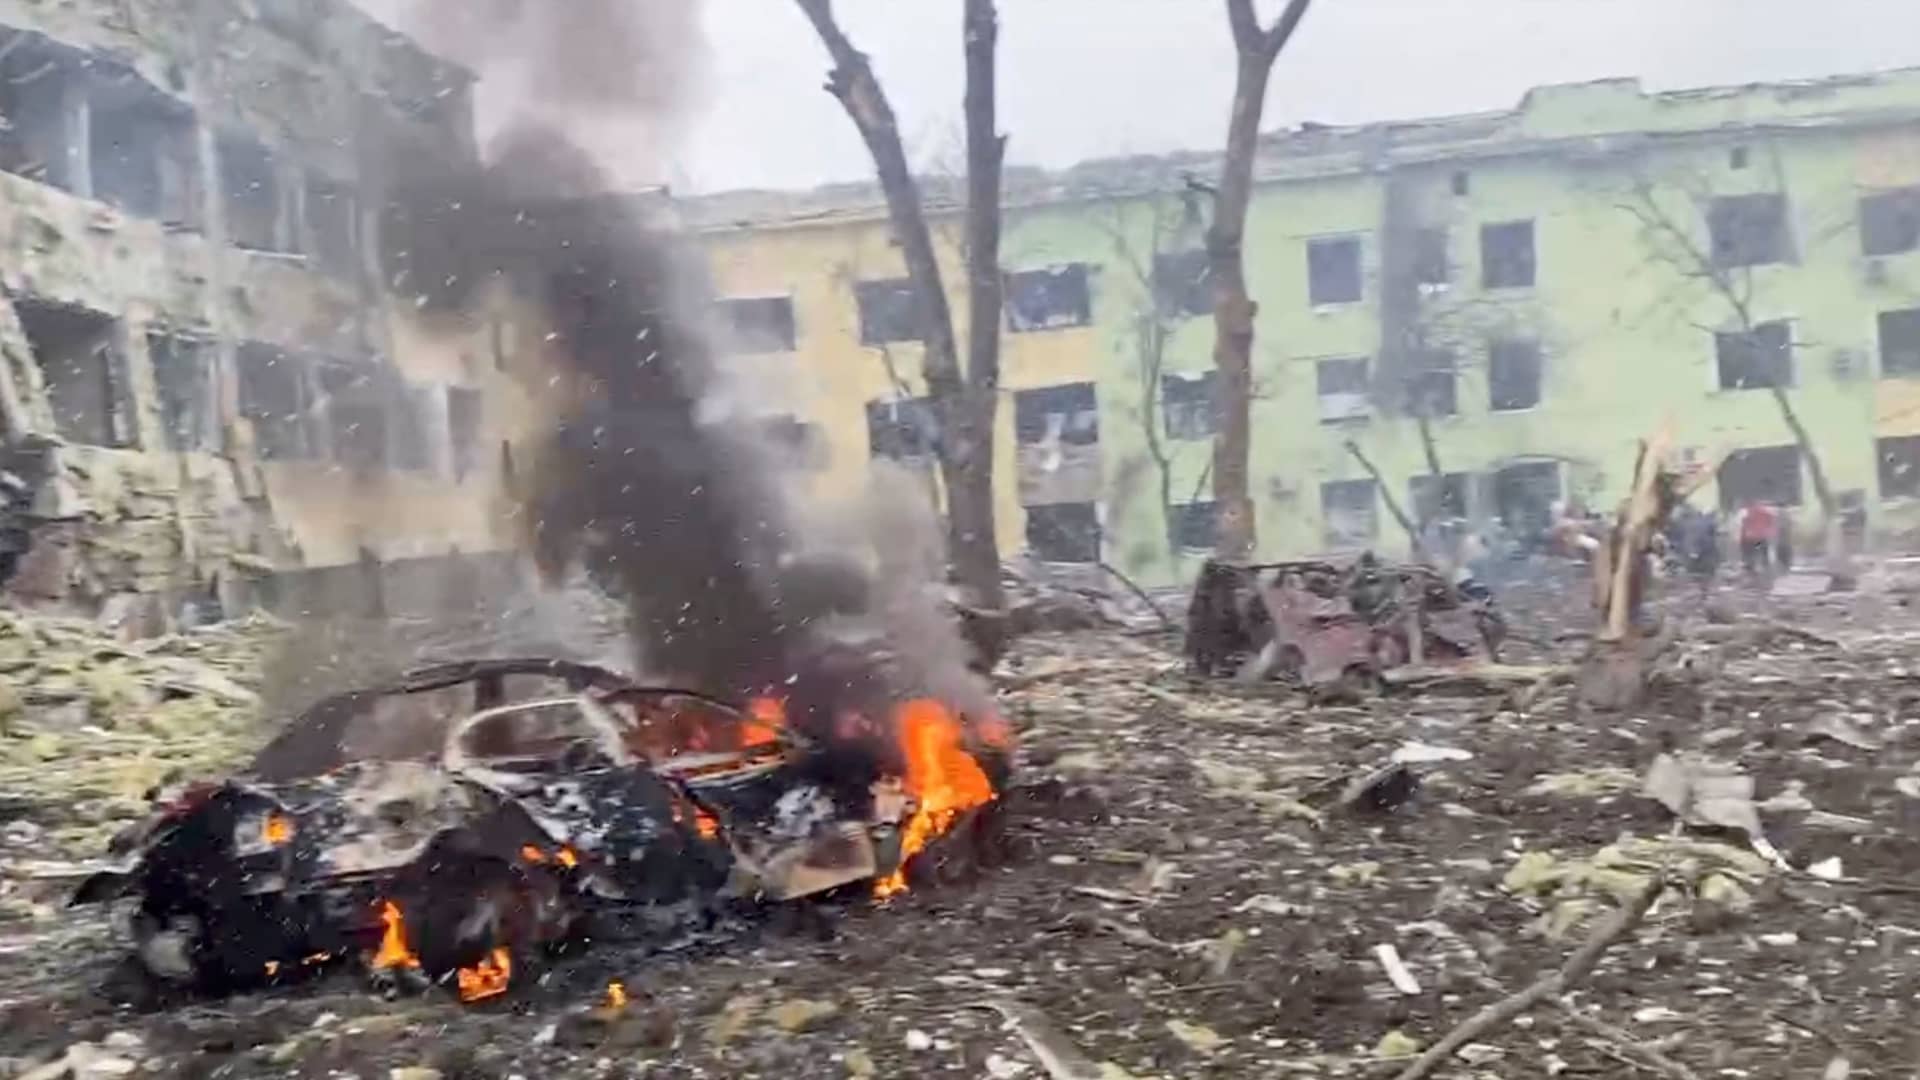 A car burns after the destruction of a children's hospital in Mariupol on March 9, 2022, in this still image from a handout video obtained by Reuters.